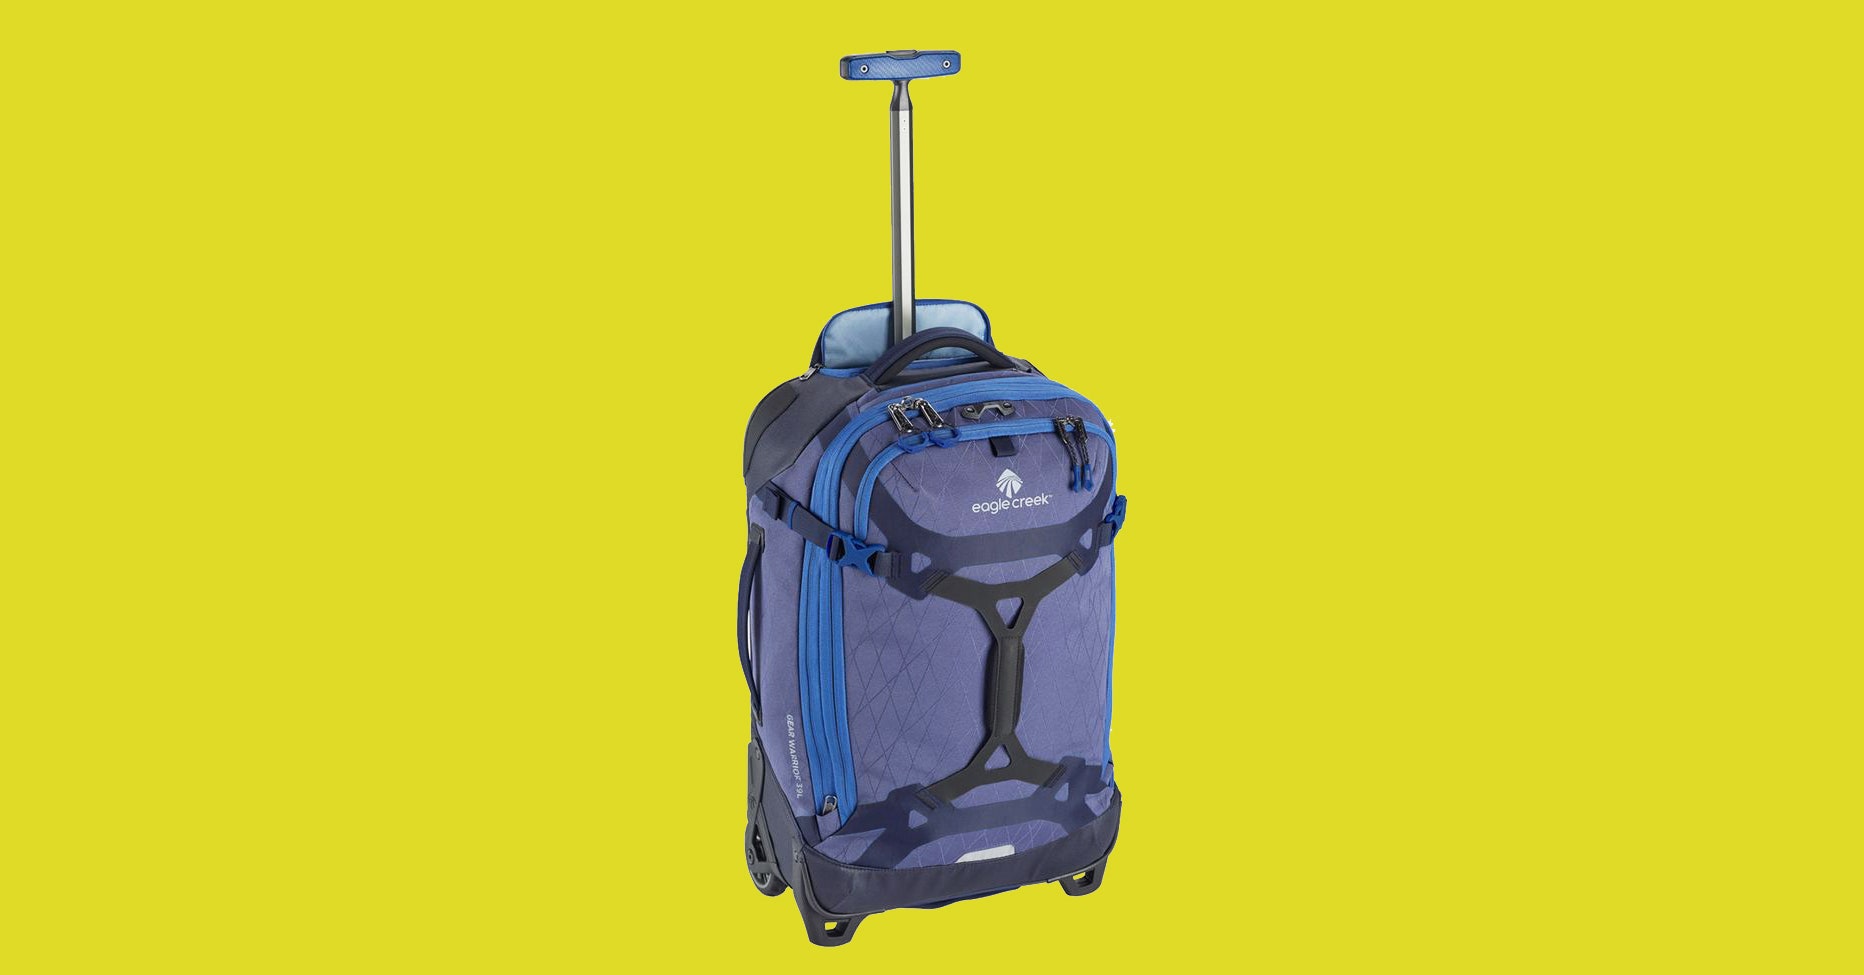 8 Best Travel Bags (2022): Carry-On Luggage, Duffel, Budget